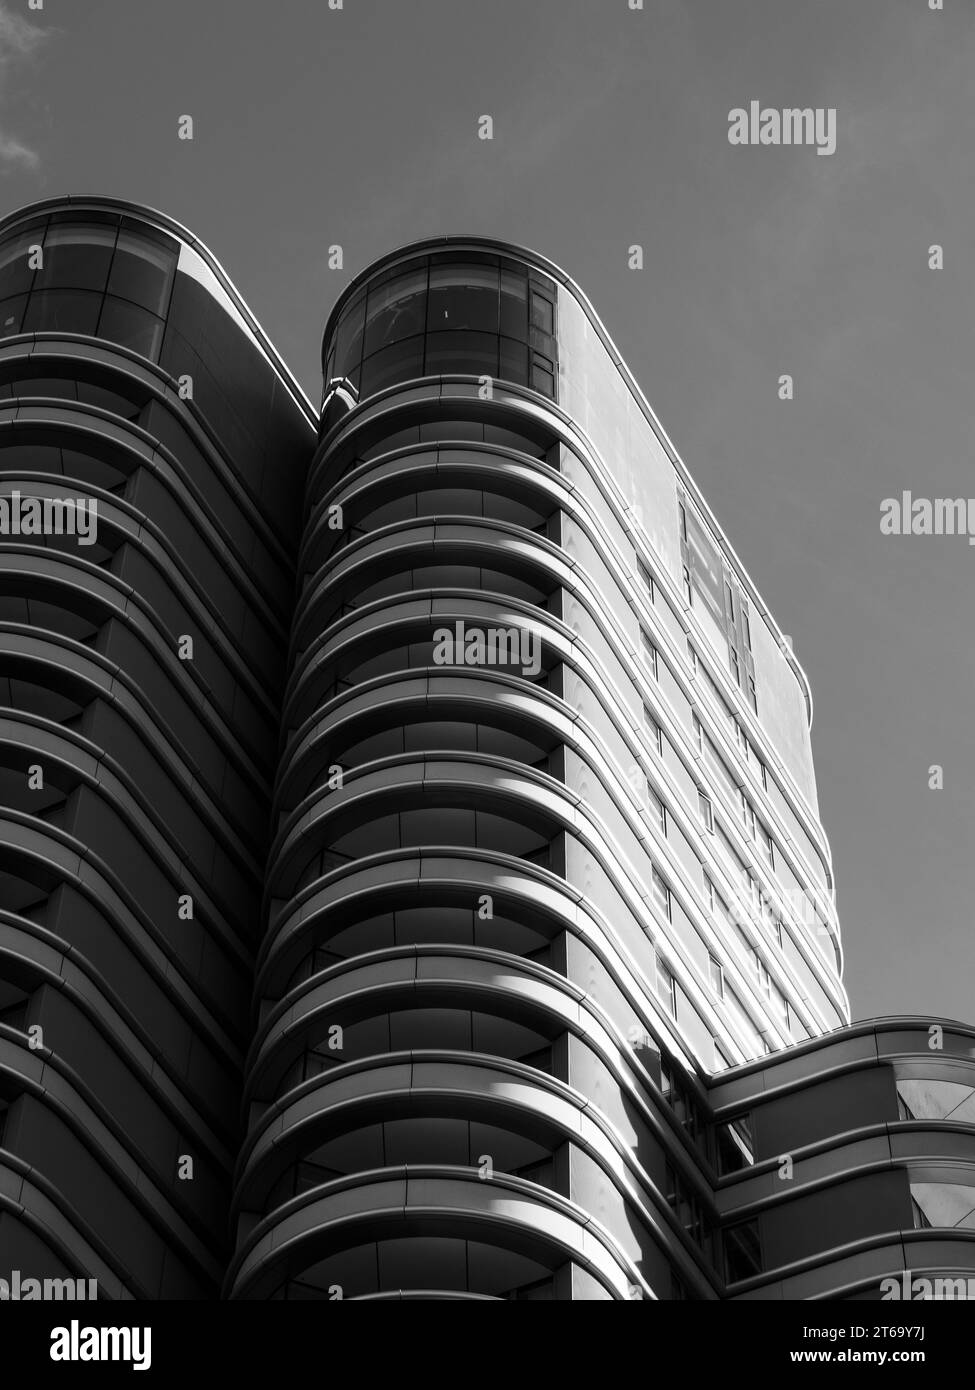 The Corniche, Mixed Use Development, Albert Embankment, South London, Londres, Angleterre, Royaume-Uni, GB. Banque D'Images